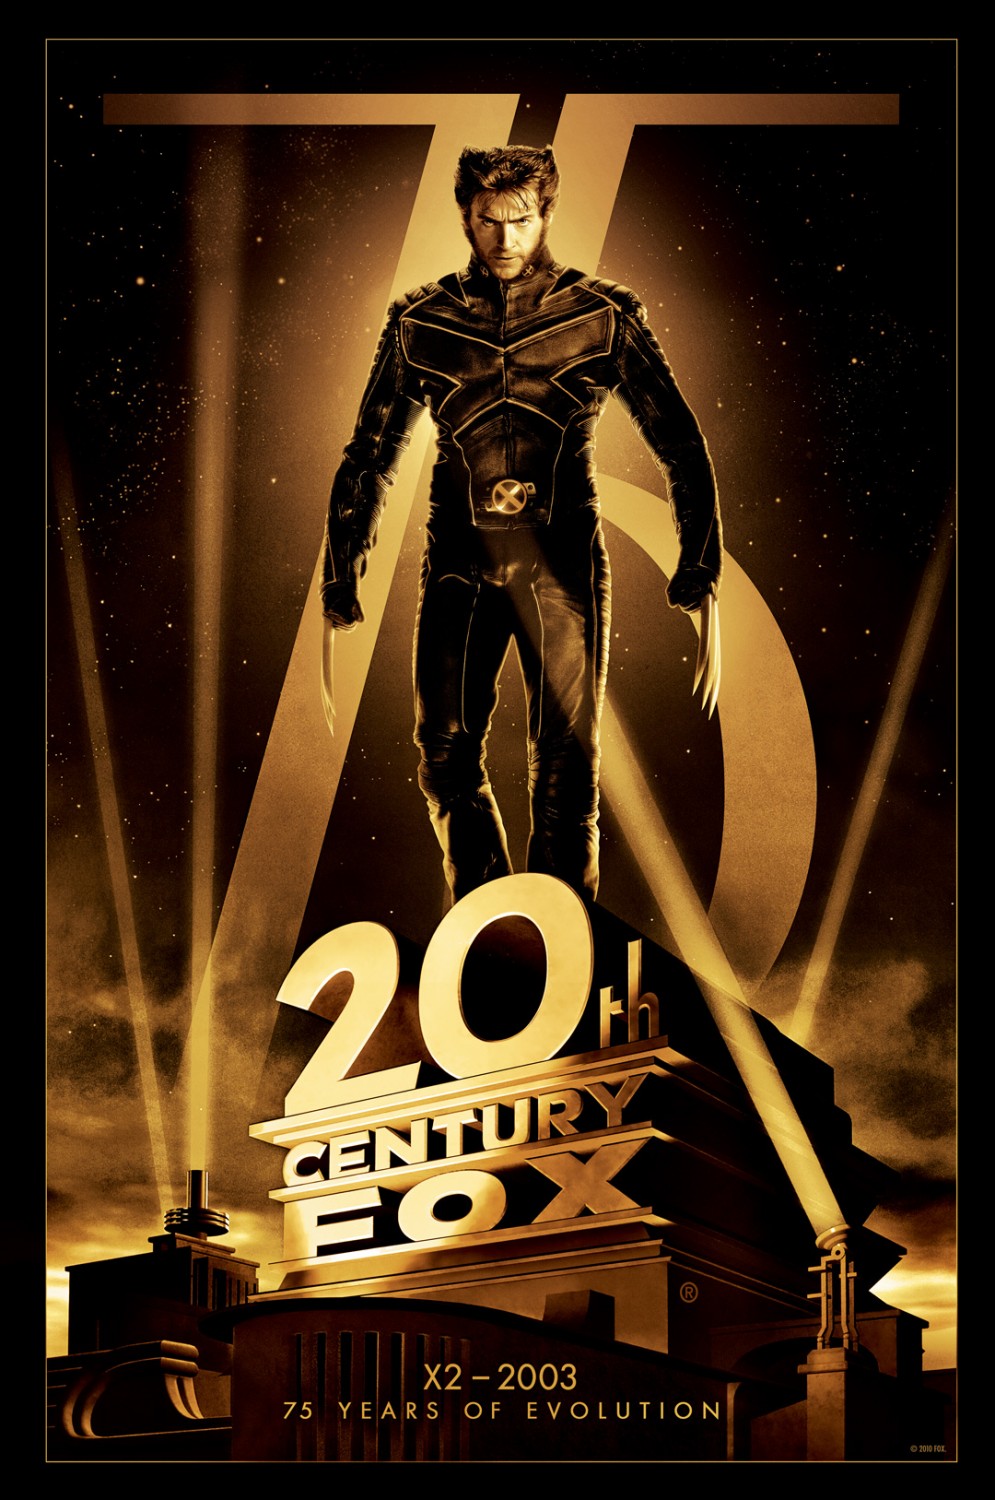 Extra Large TV Poster Image for 20th Century Fox 75th Anniversary (#1 of 4)